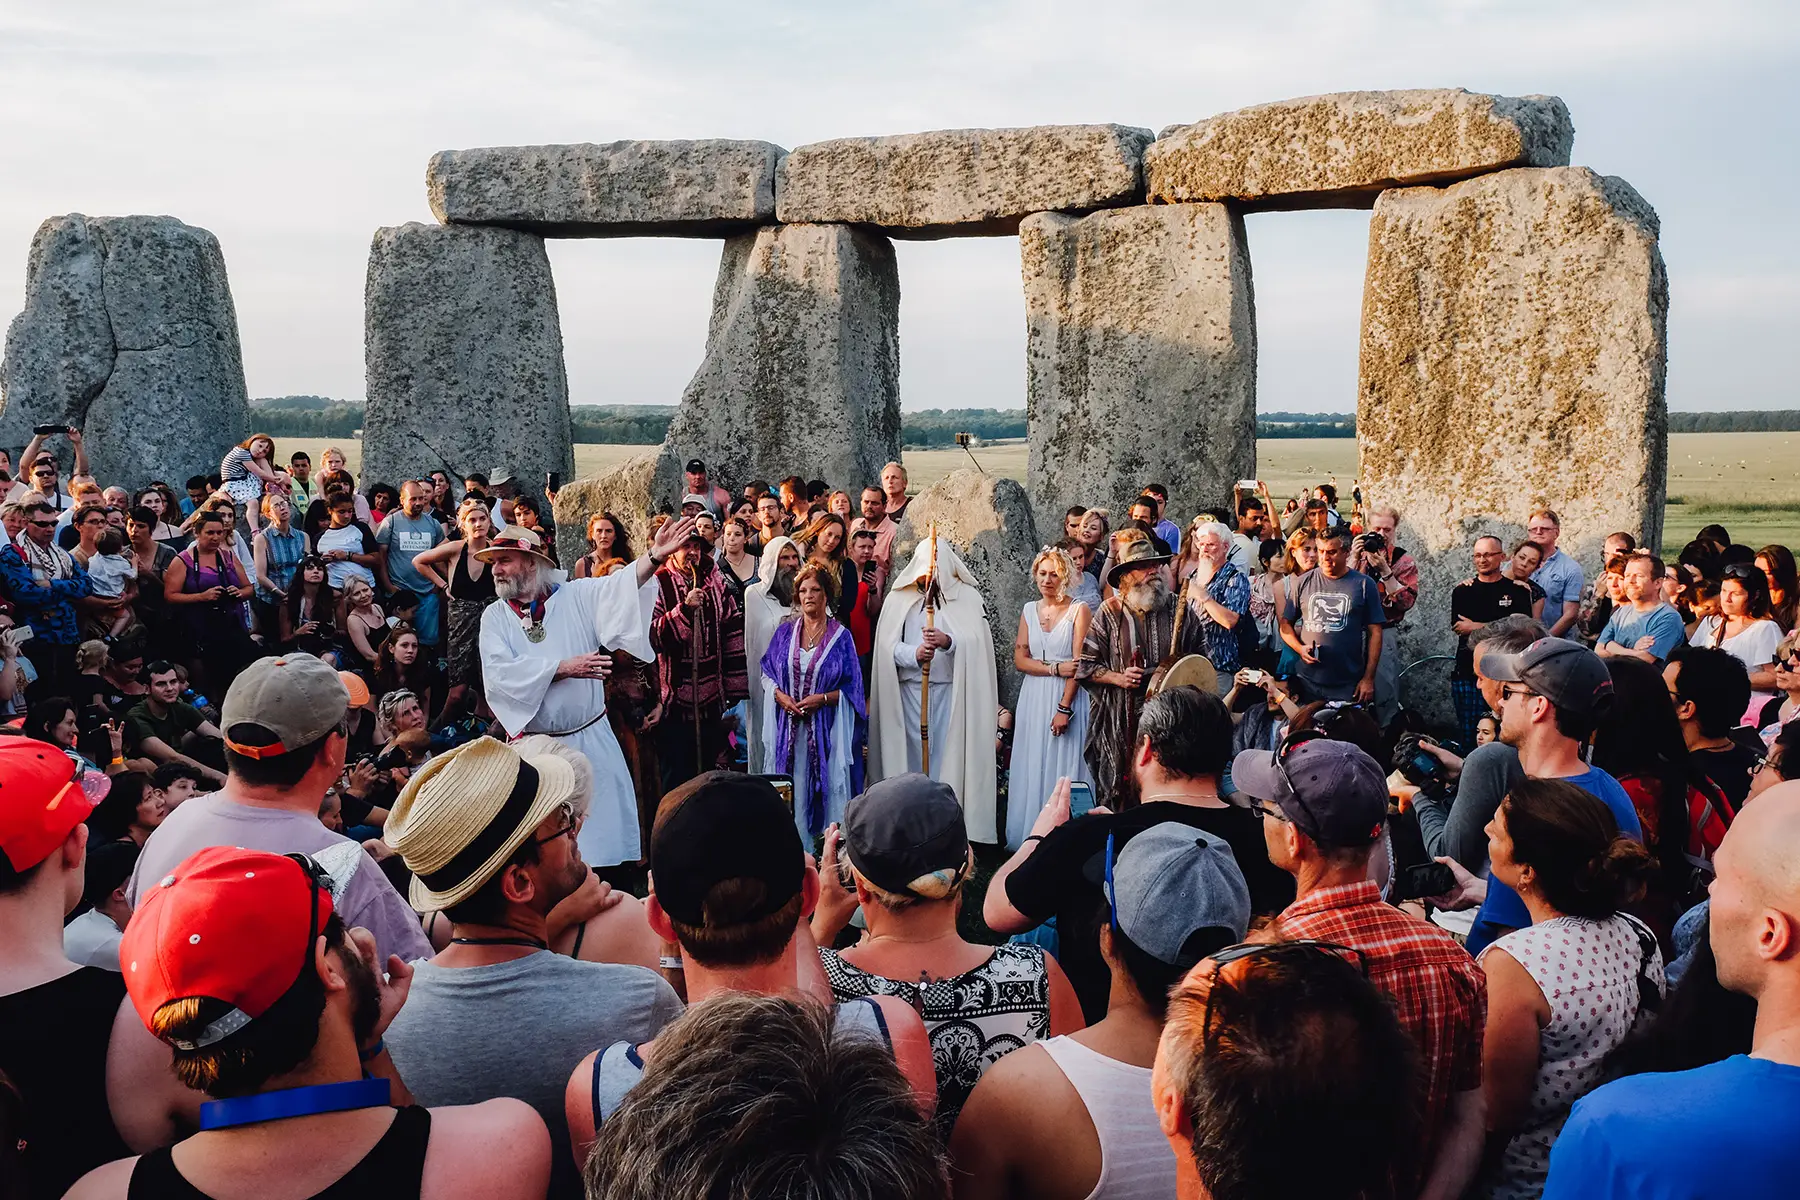 A crowd celebrating the summer solstice at Stonehenge